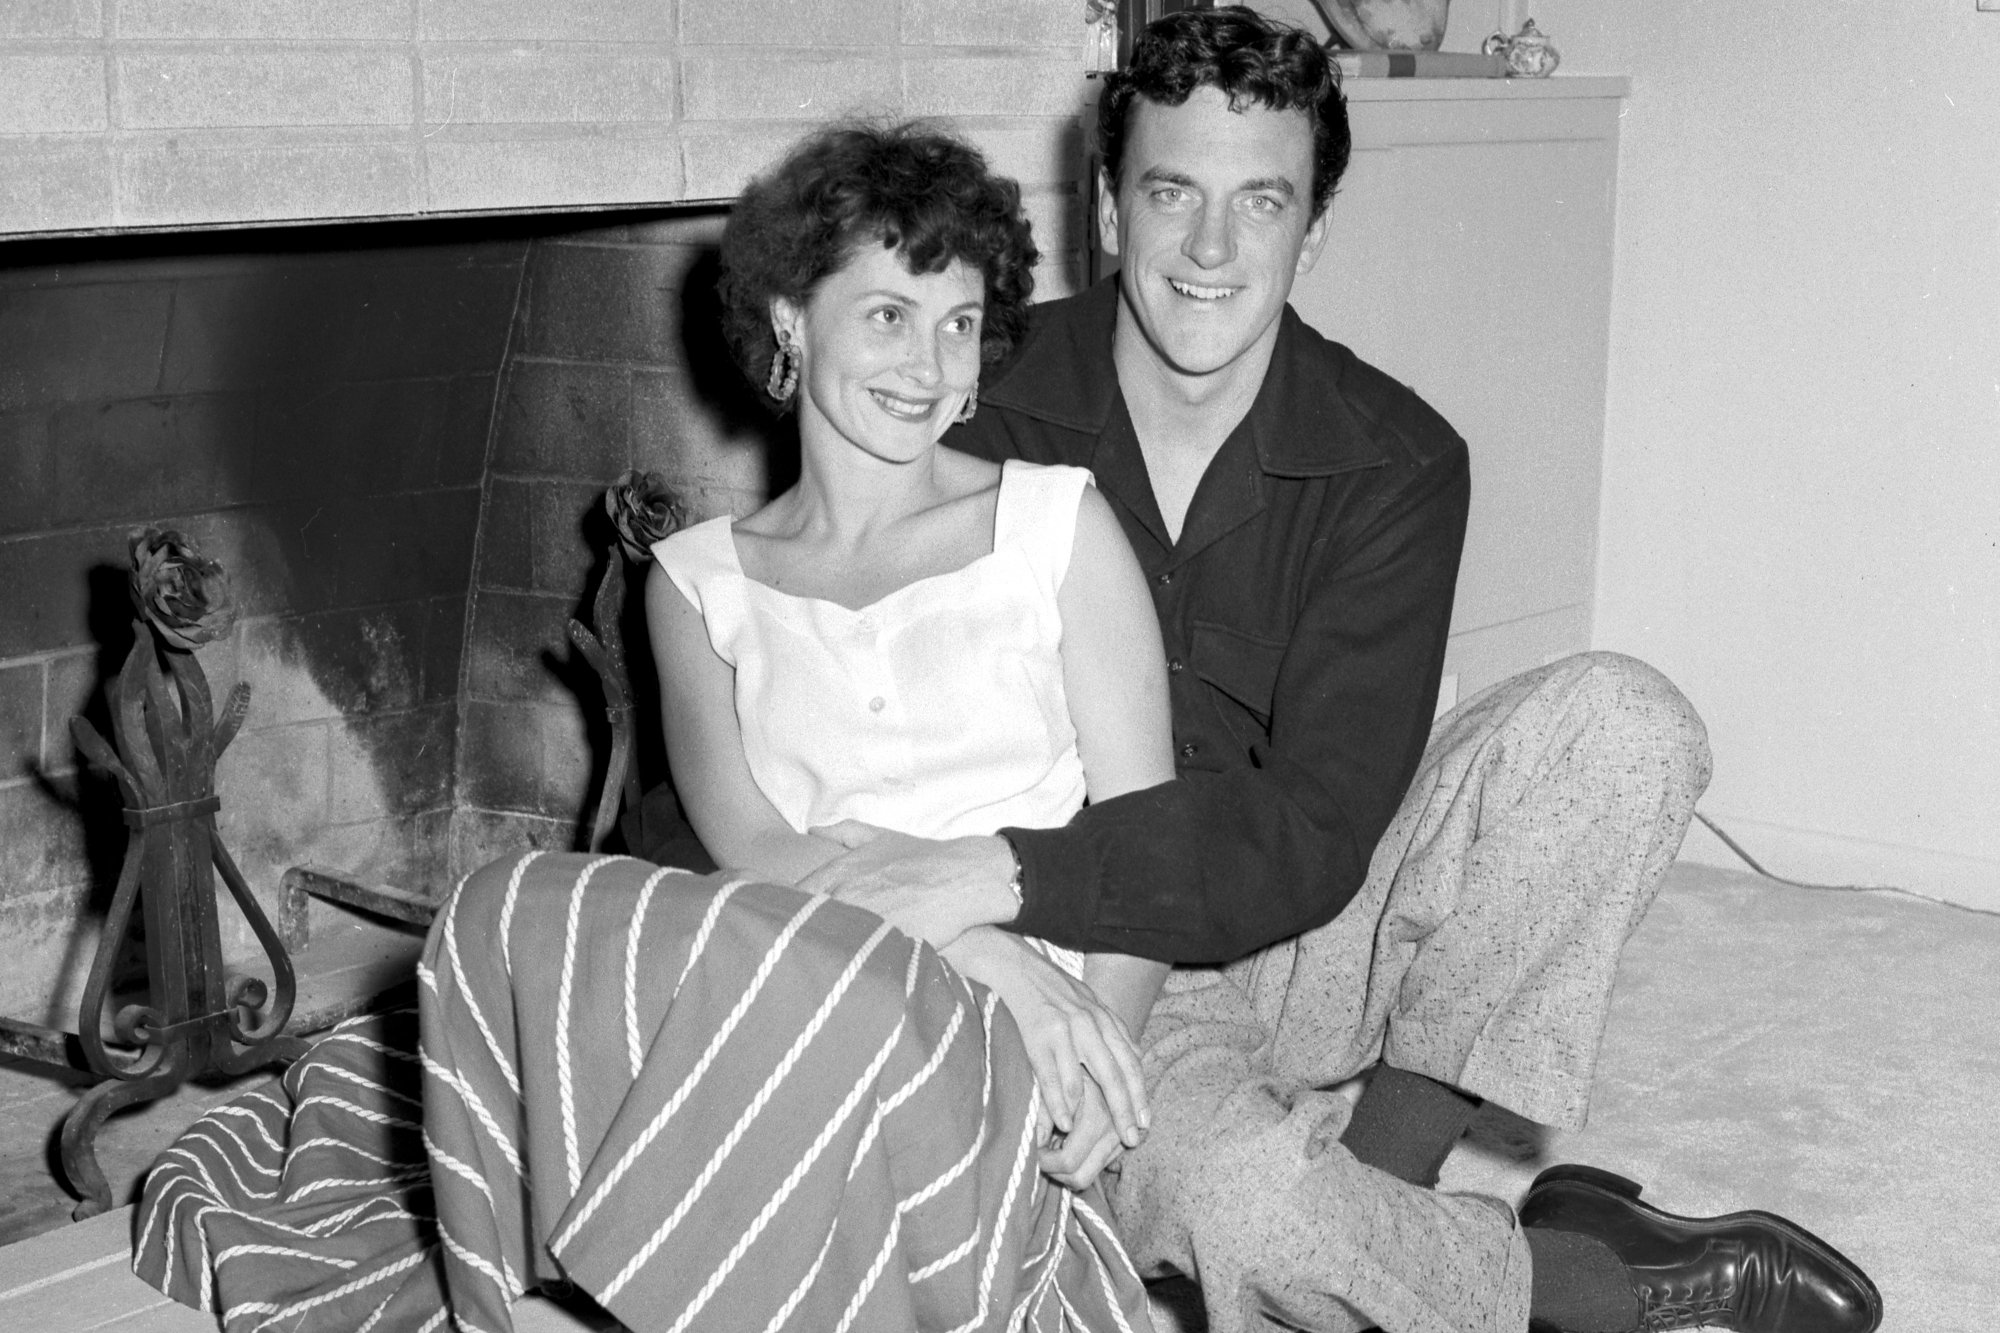 'Gunsmoke' Virginia Arness and James Arness sitting in front of their fireplace. James has his arm wrapped around Virginia.